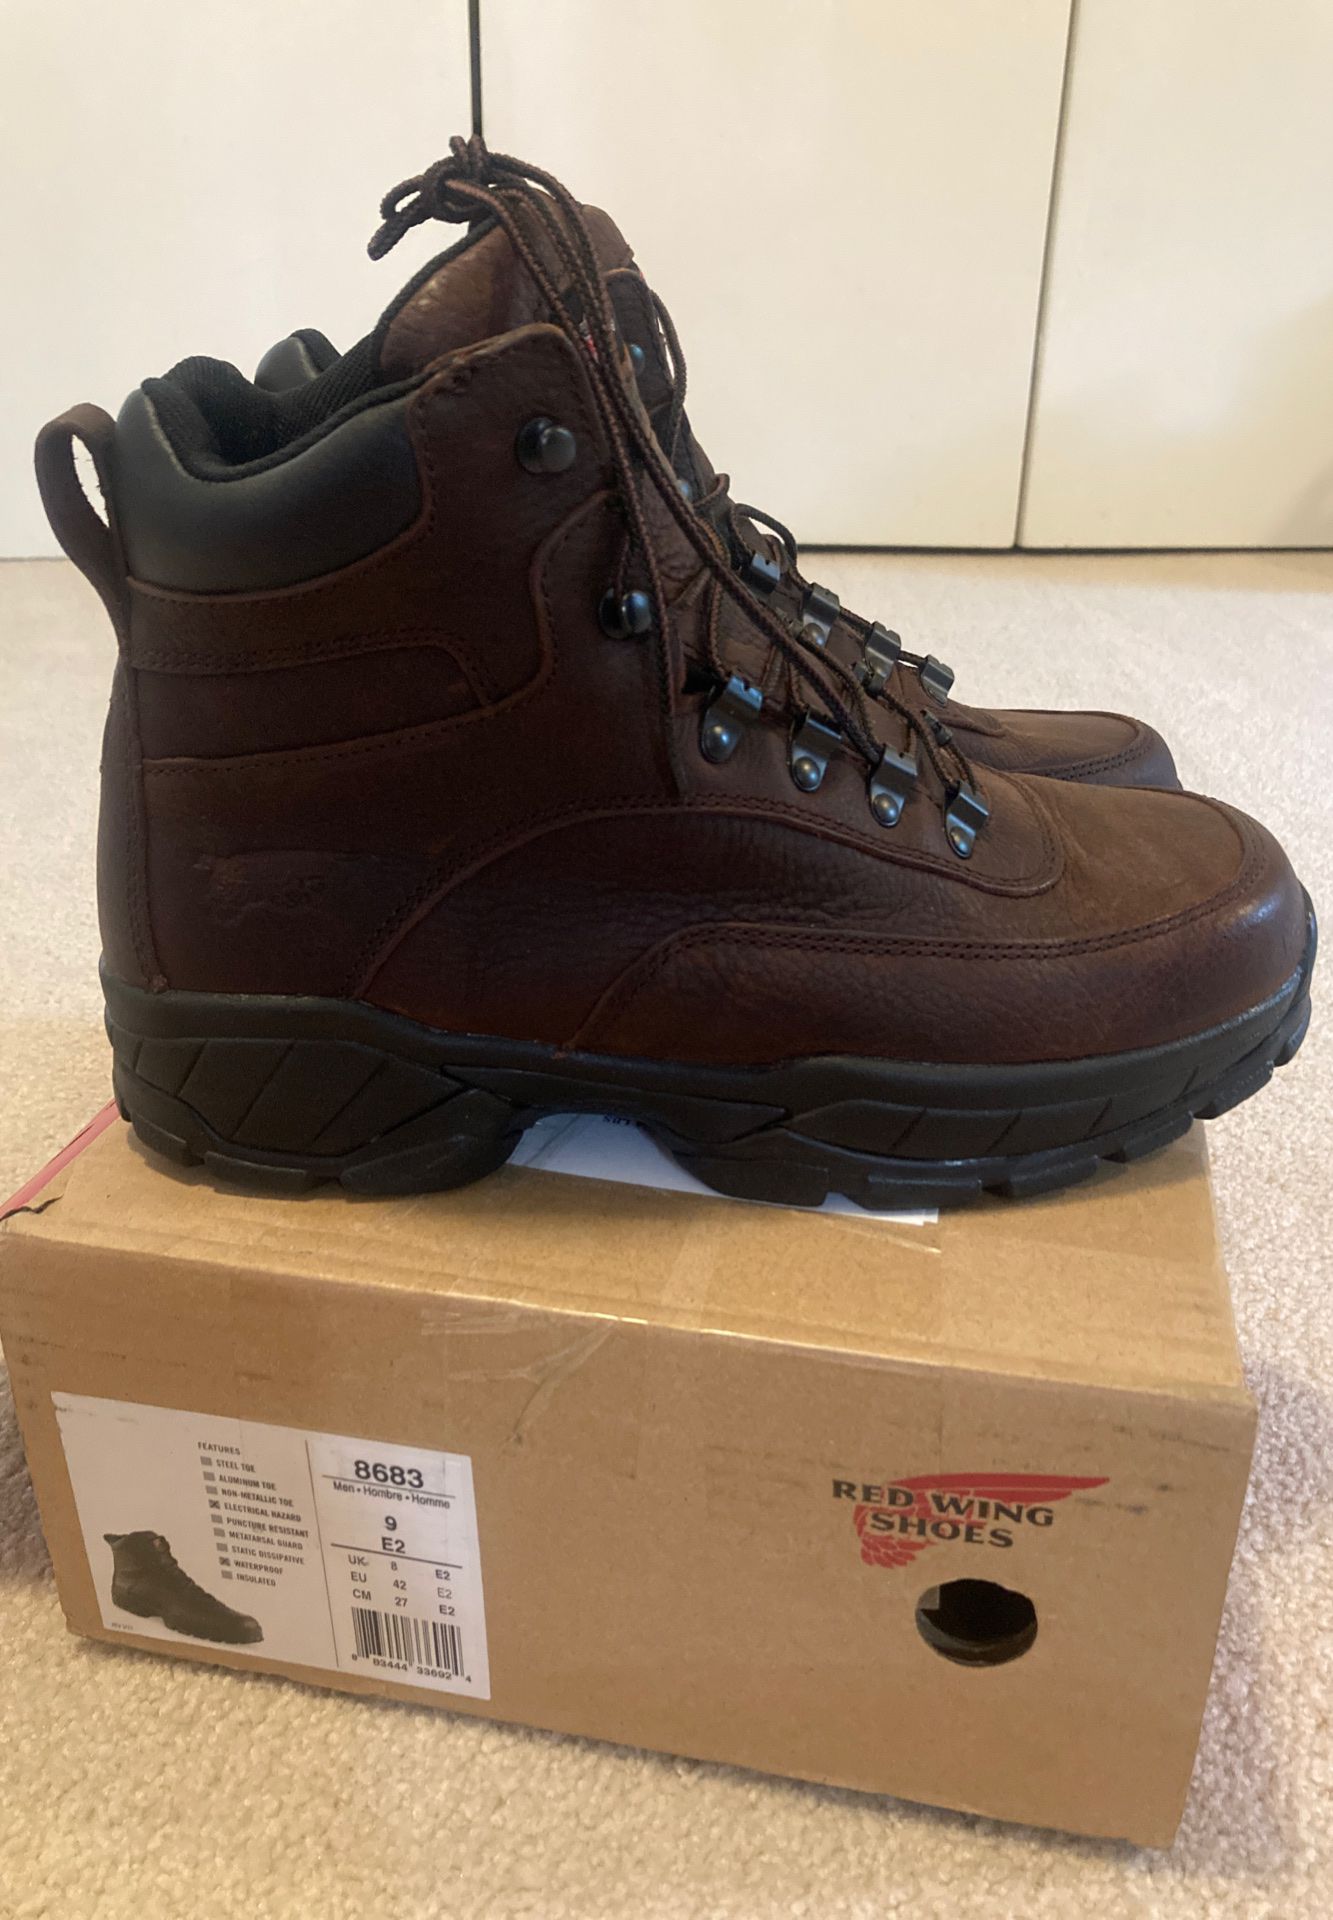 red wing shoes truhiker 9 2e